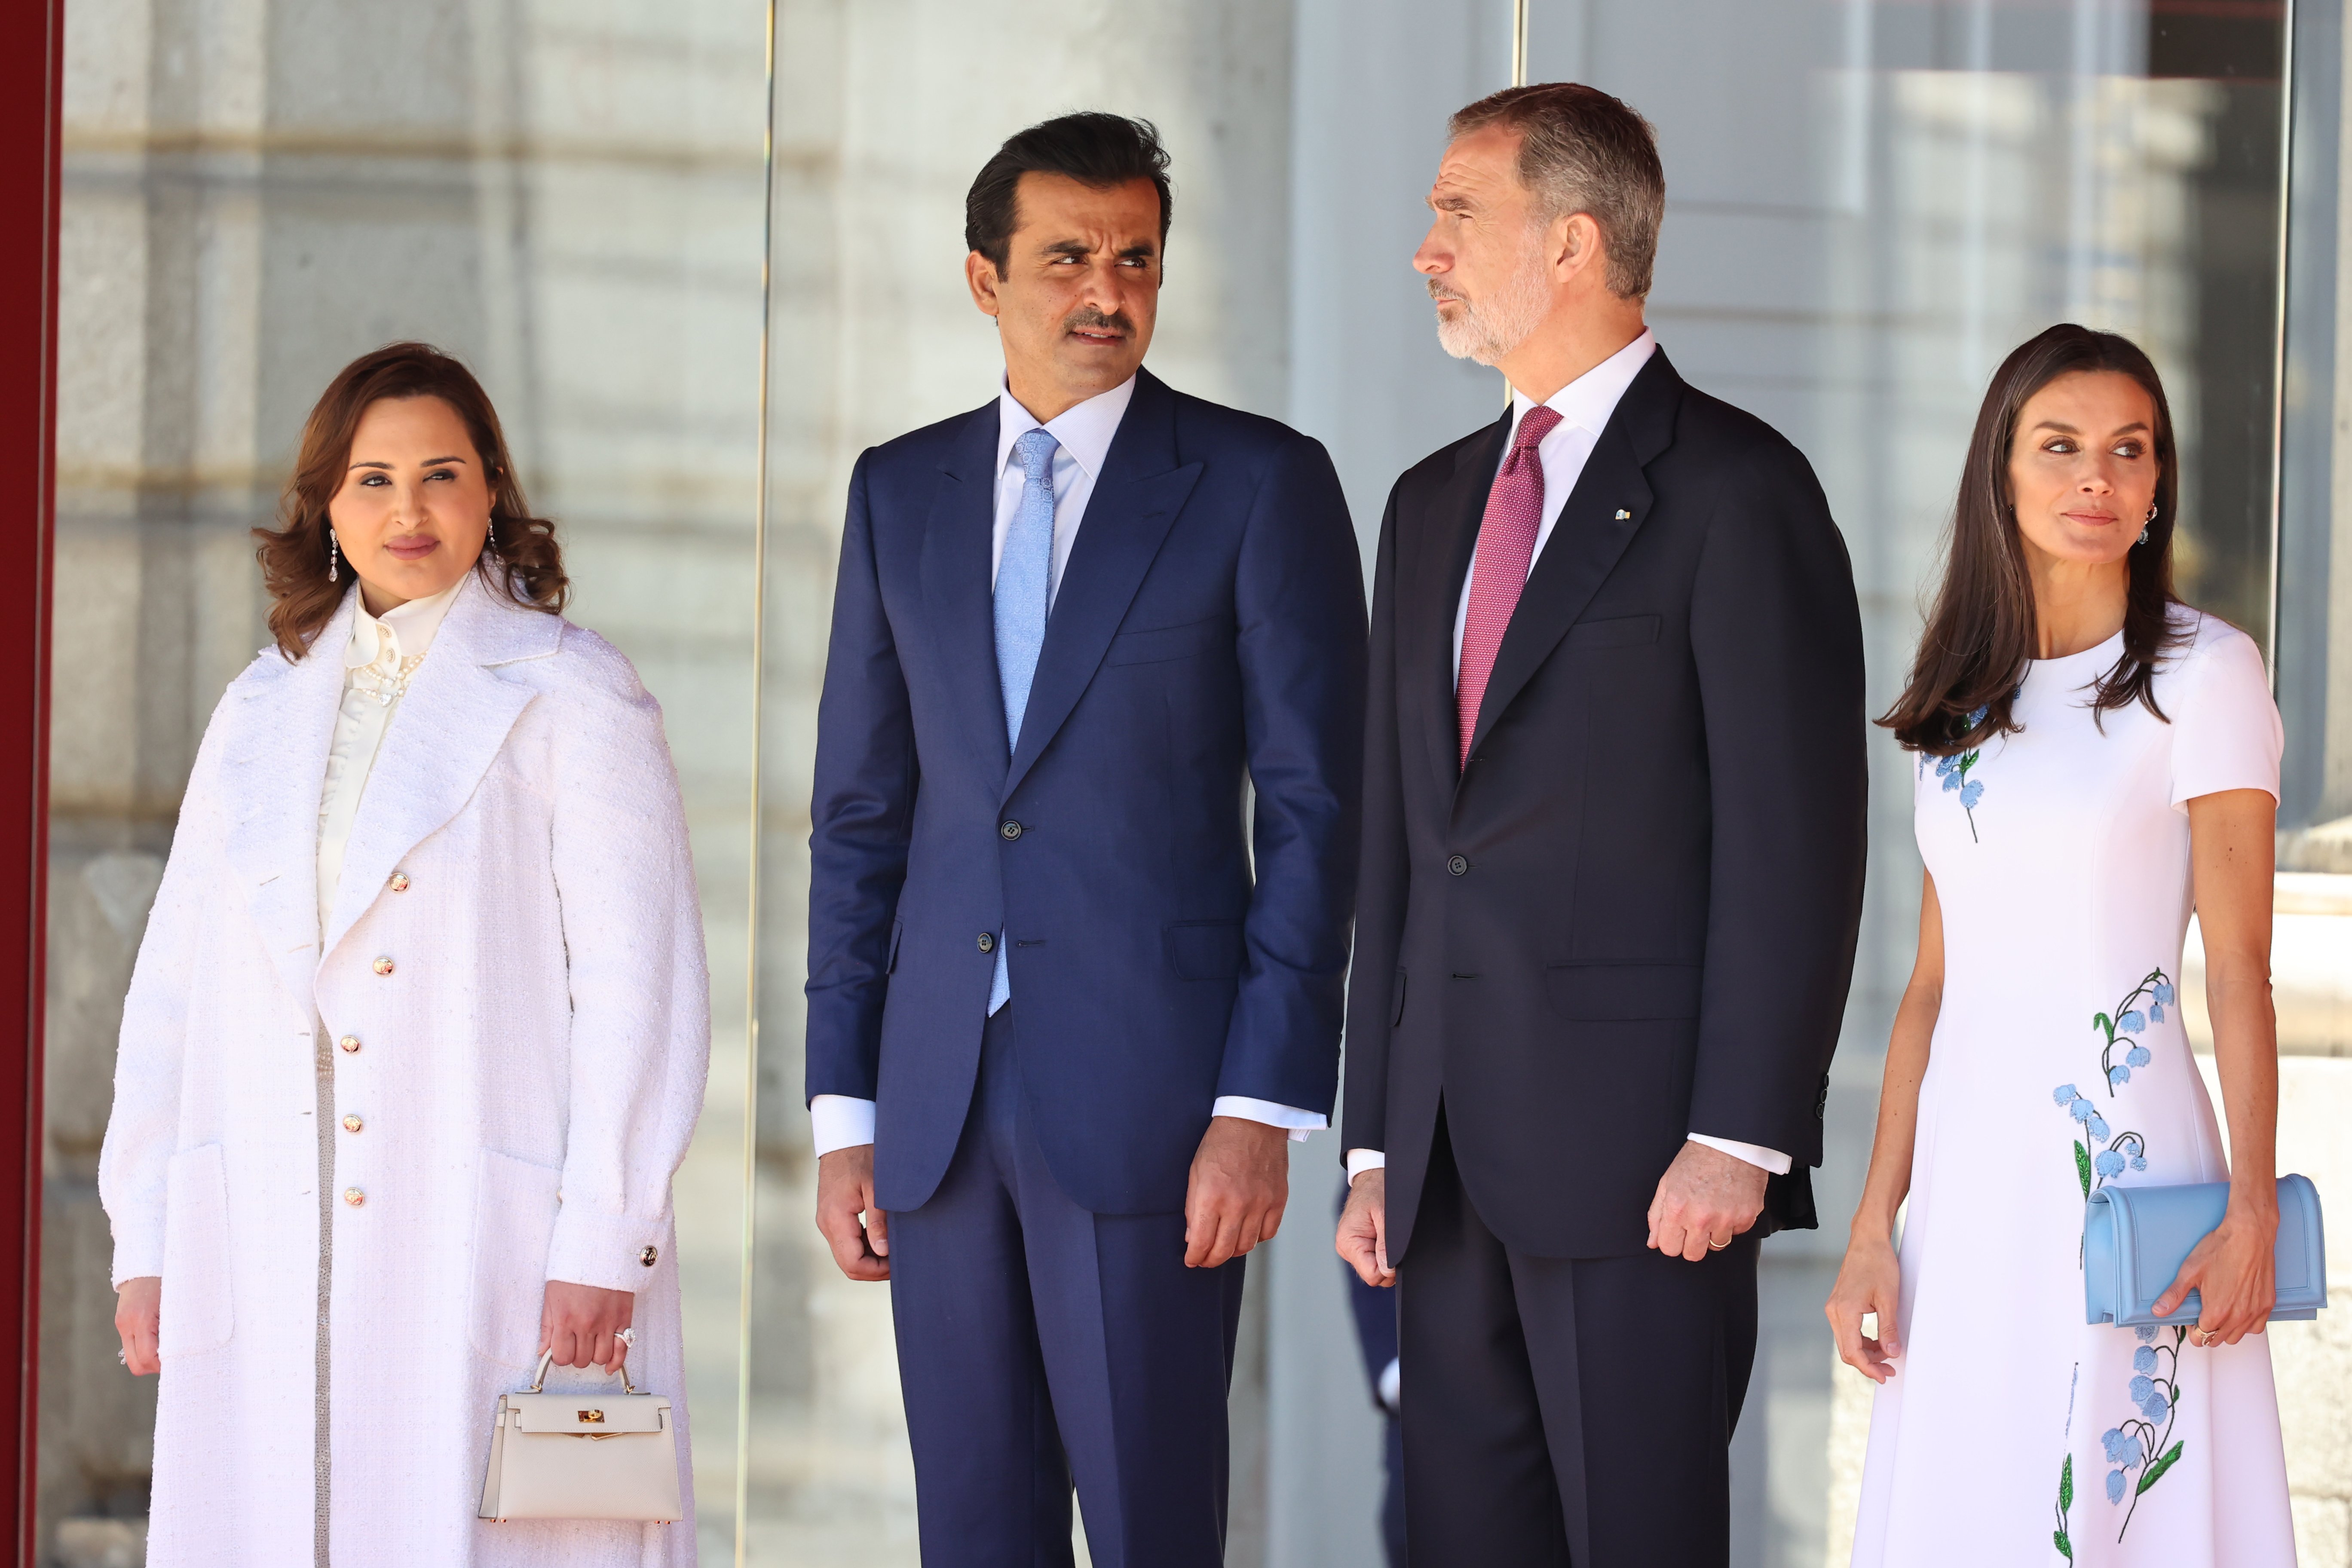 Felipe VI, the only European king going to Qatar for the World Cup, despite criticism